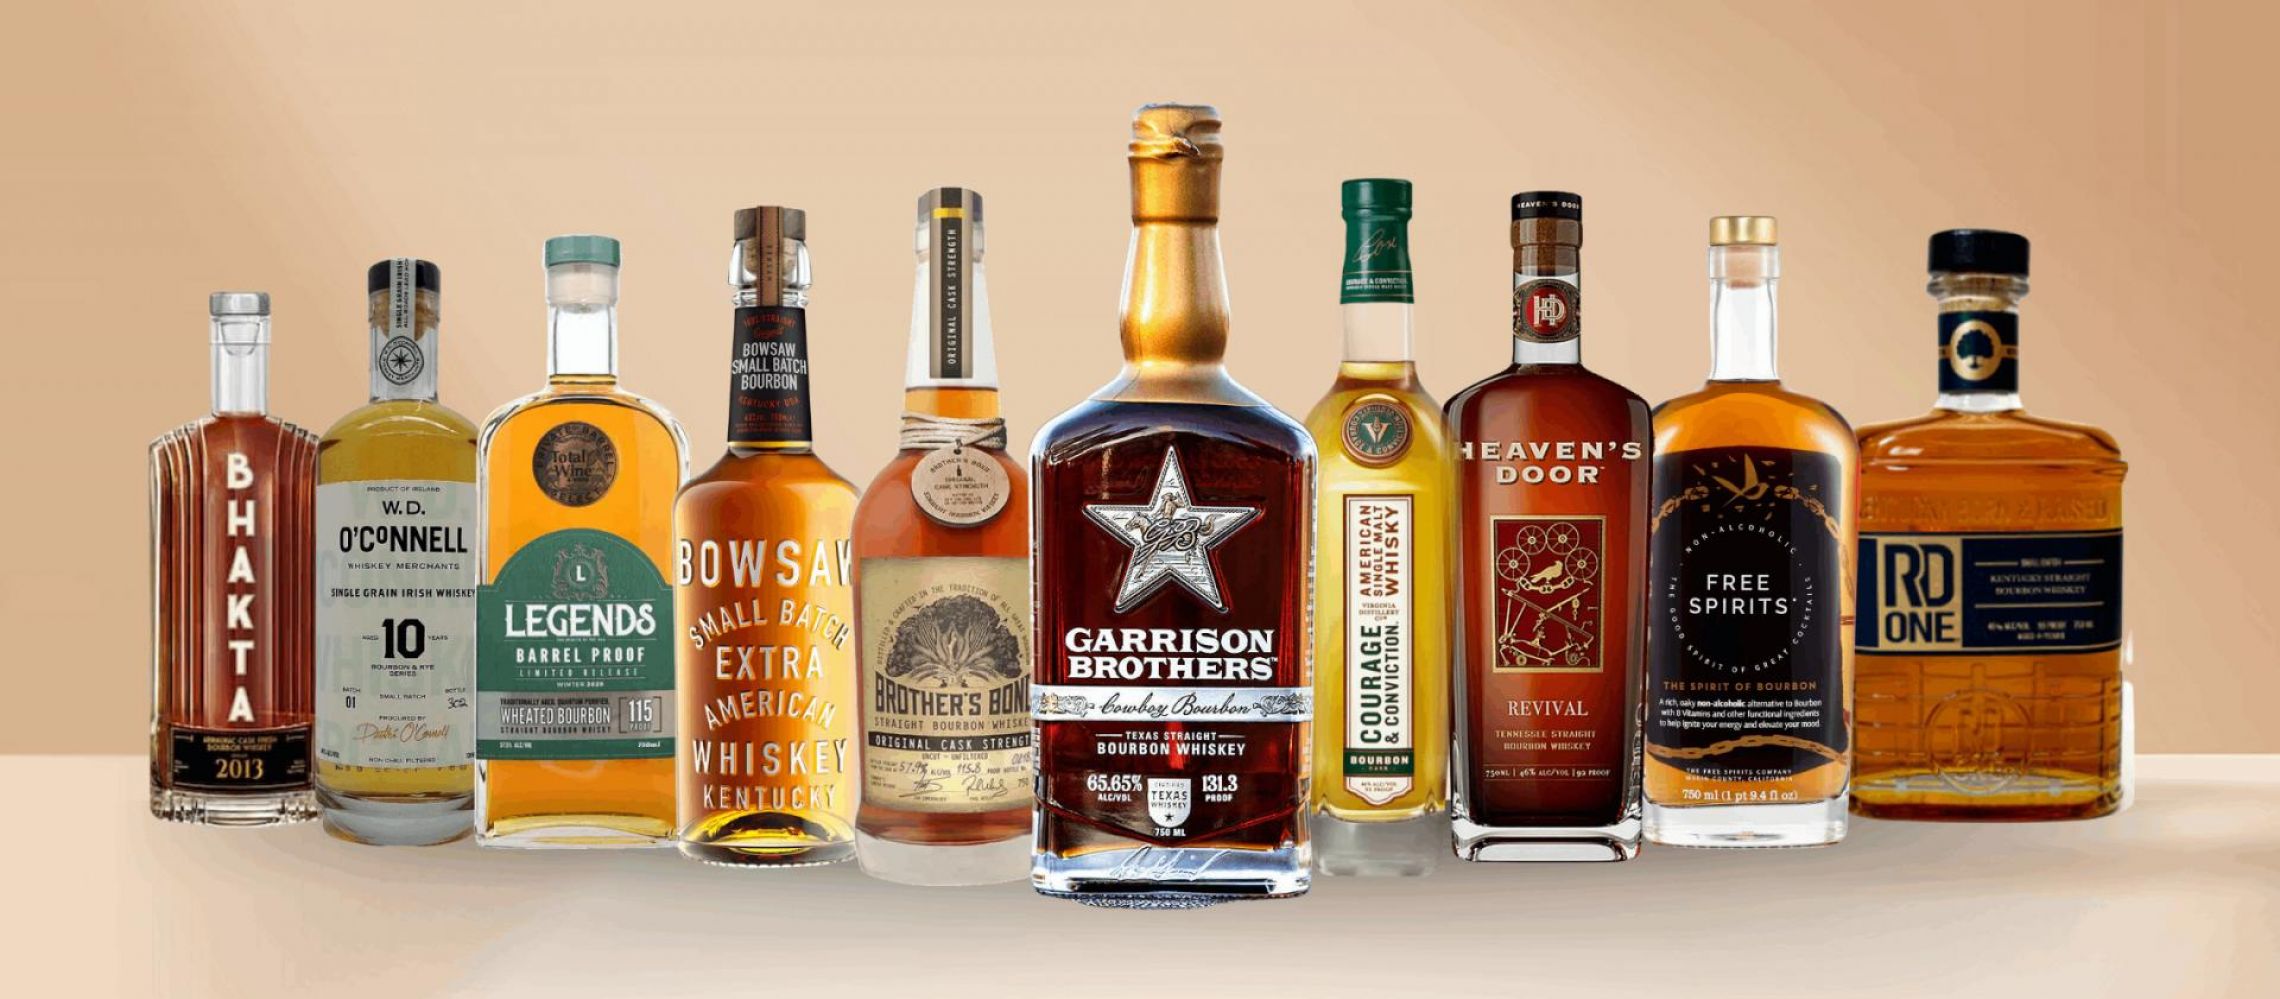 Photo for: Elevate Your Winter: 10 Bourbons to Try for an Unforgettable Season